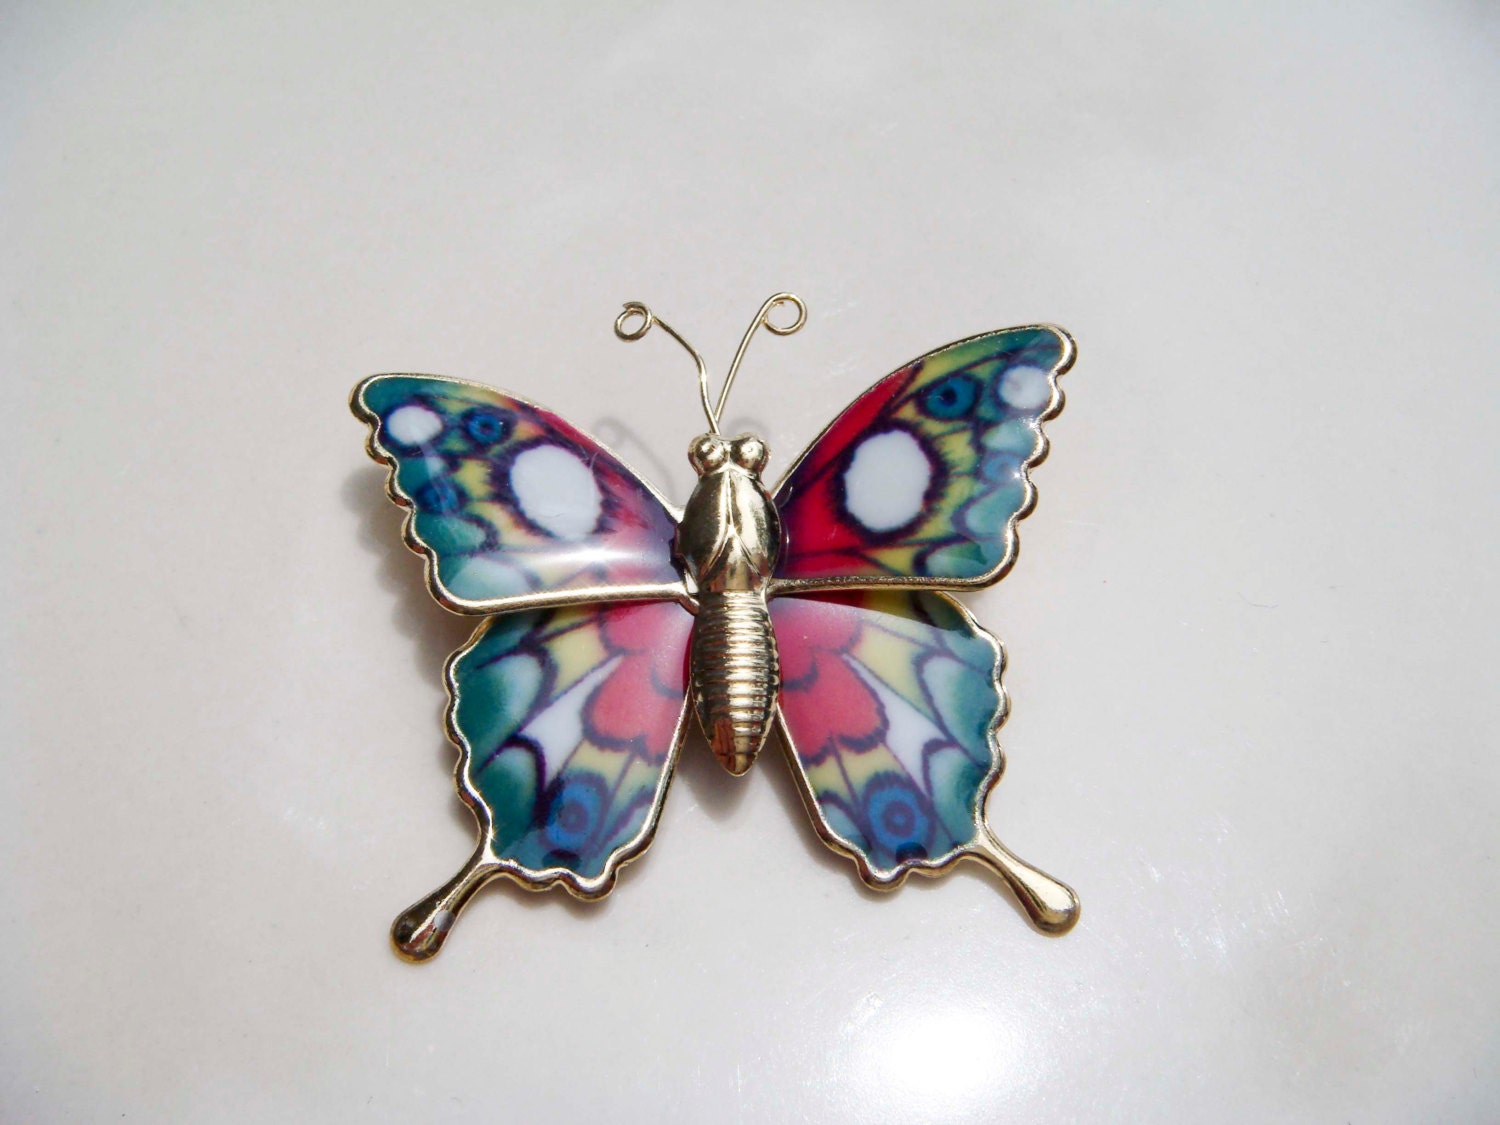 Vintage Metal Butterfly Pin brooch Pink white Green and Blue